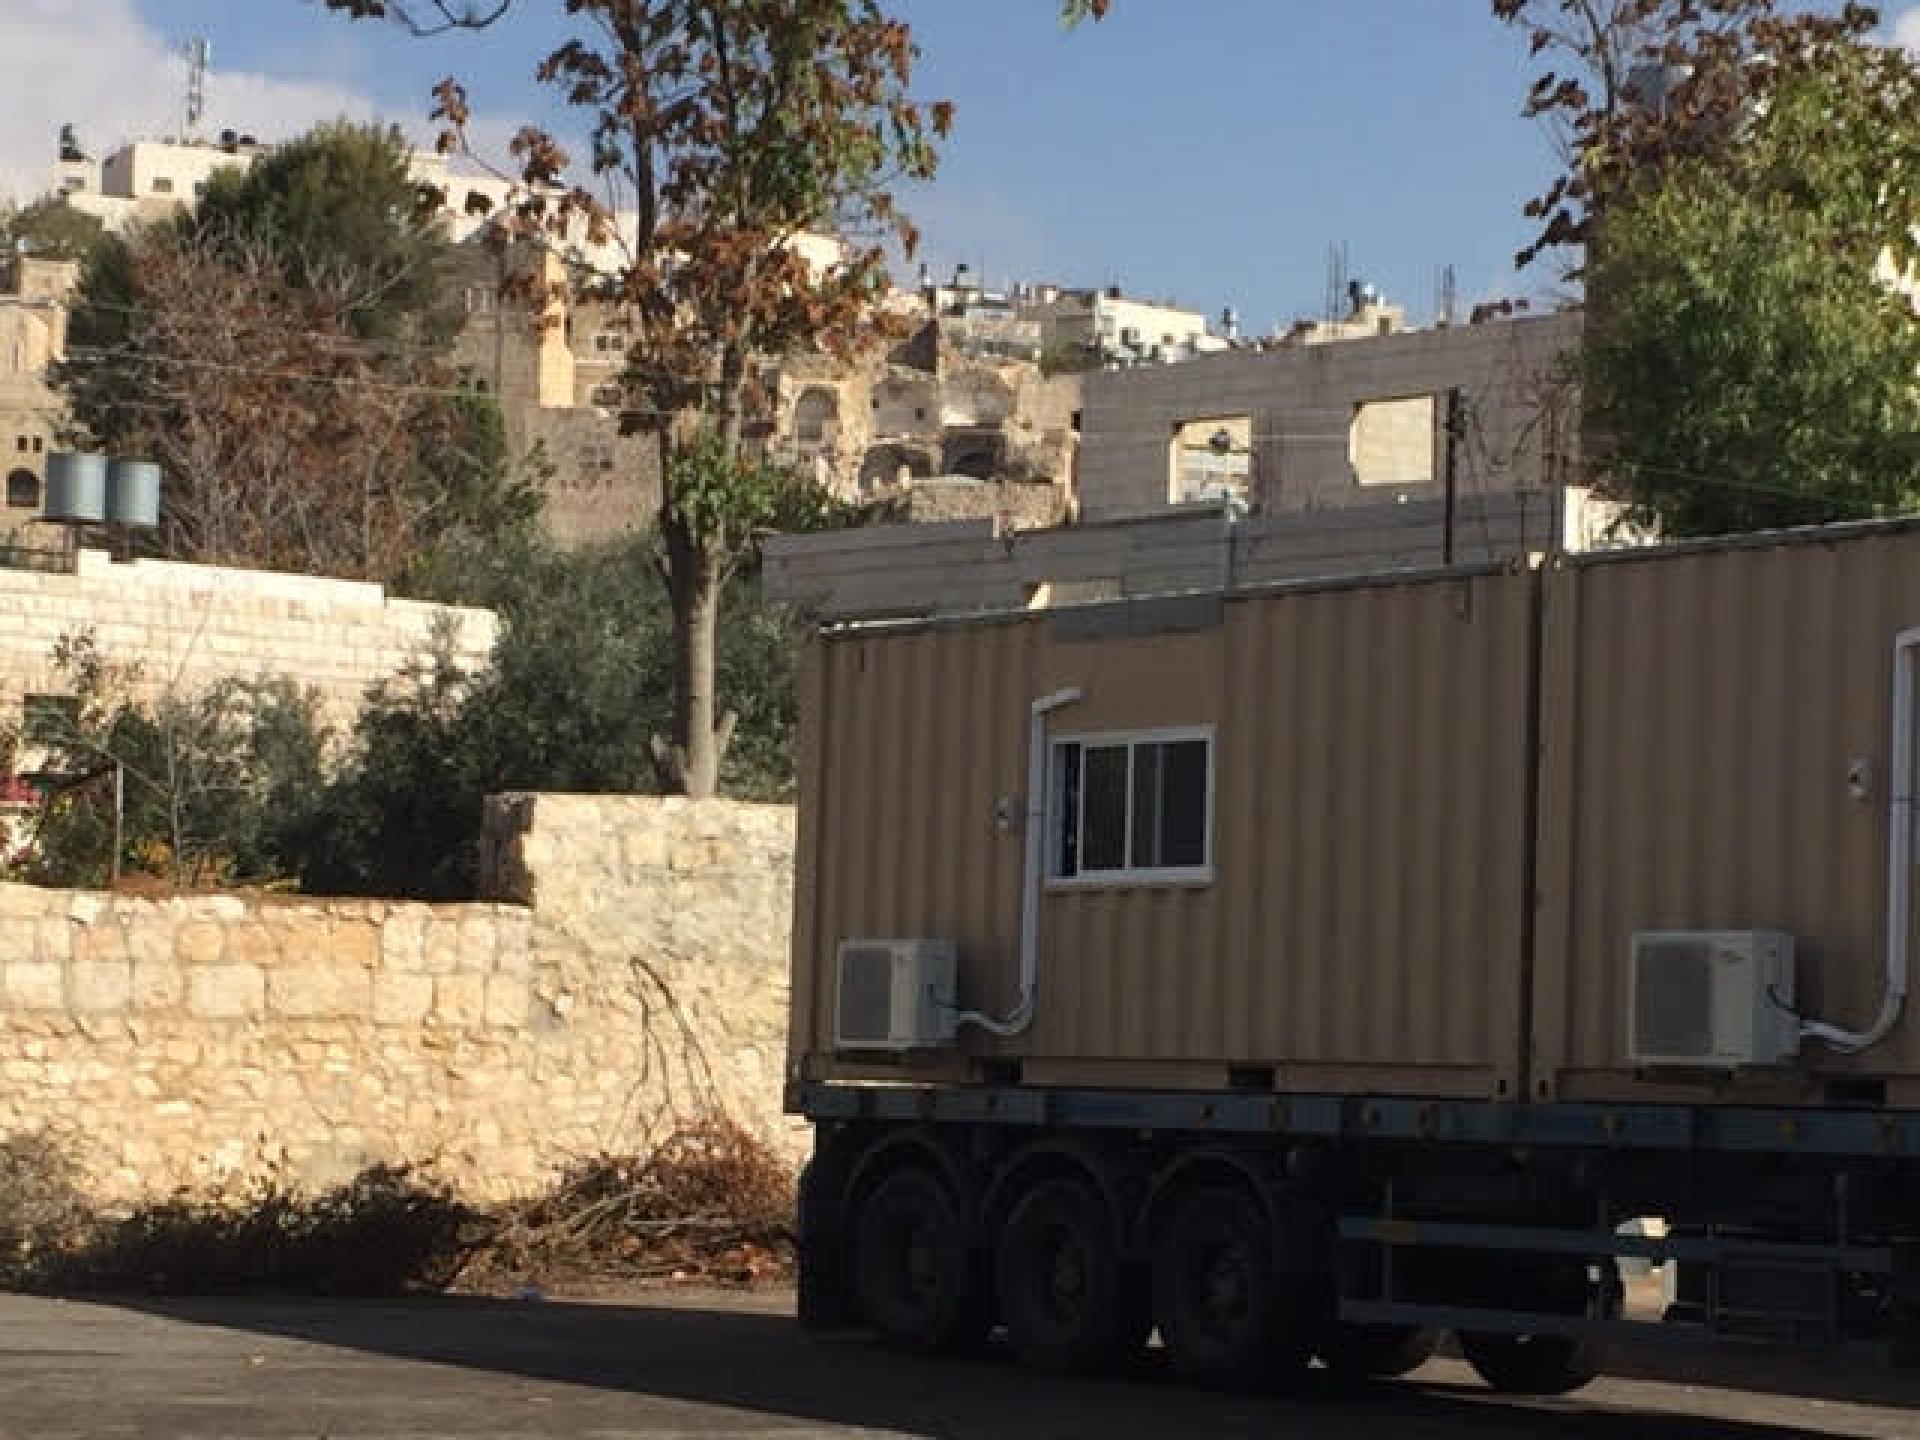 A military vehicle is driving with three mobile buildings